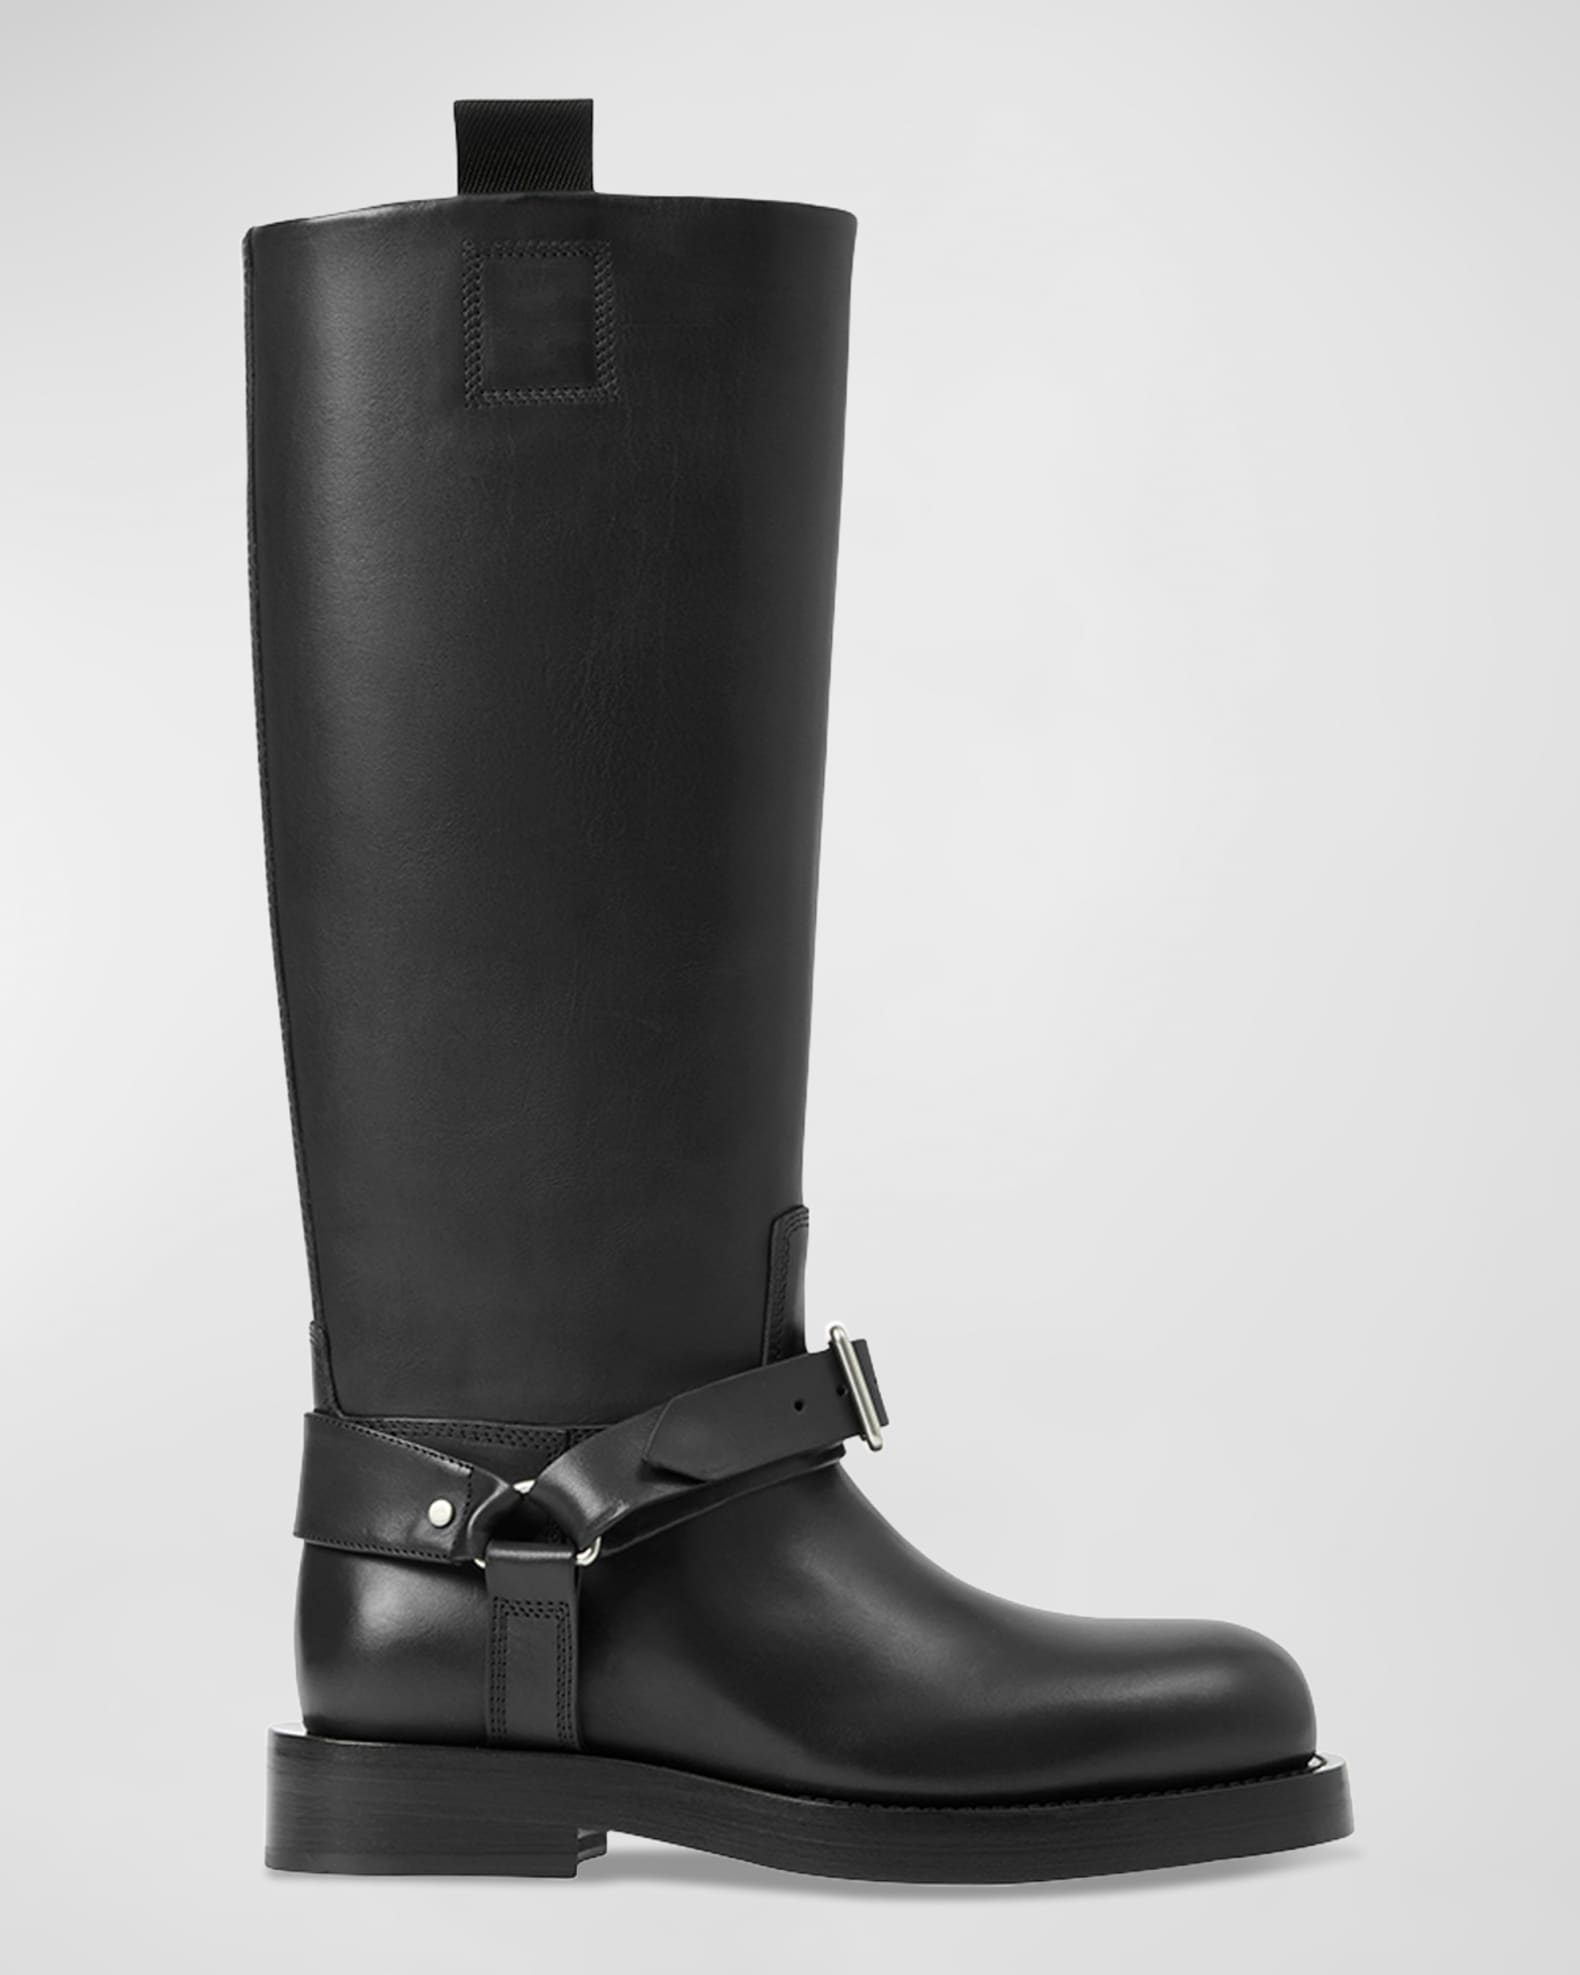 Burberry Saddle Leather Tall Moto Boots | Neiman Marcus